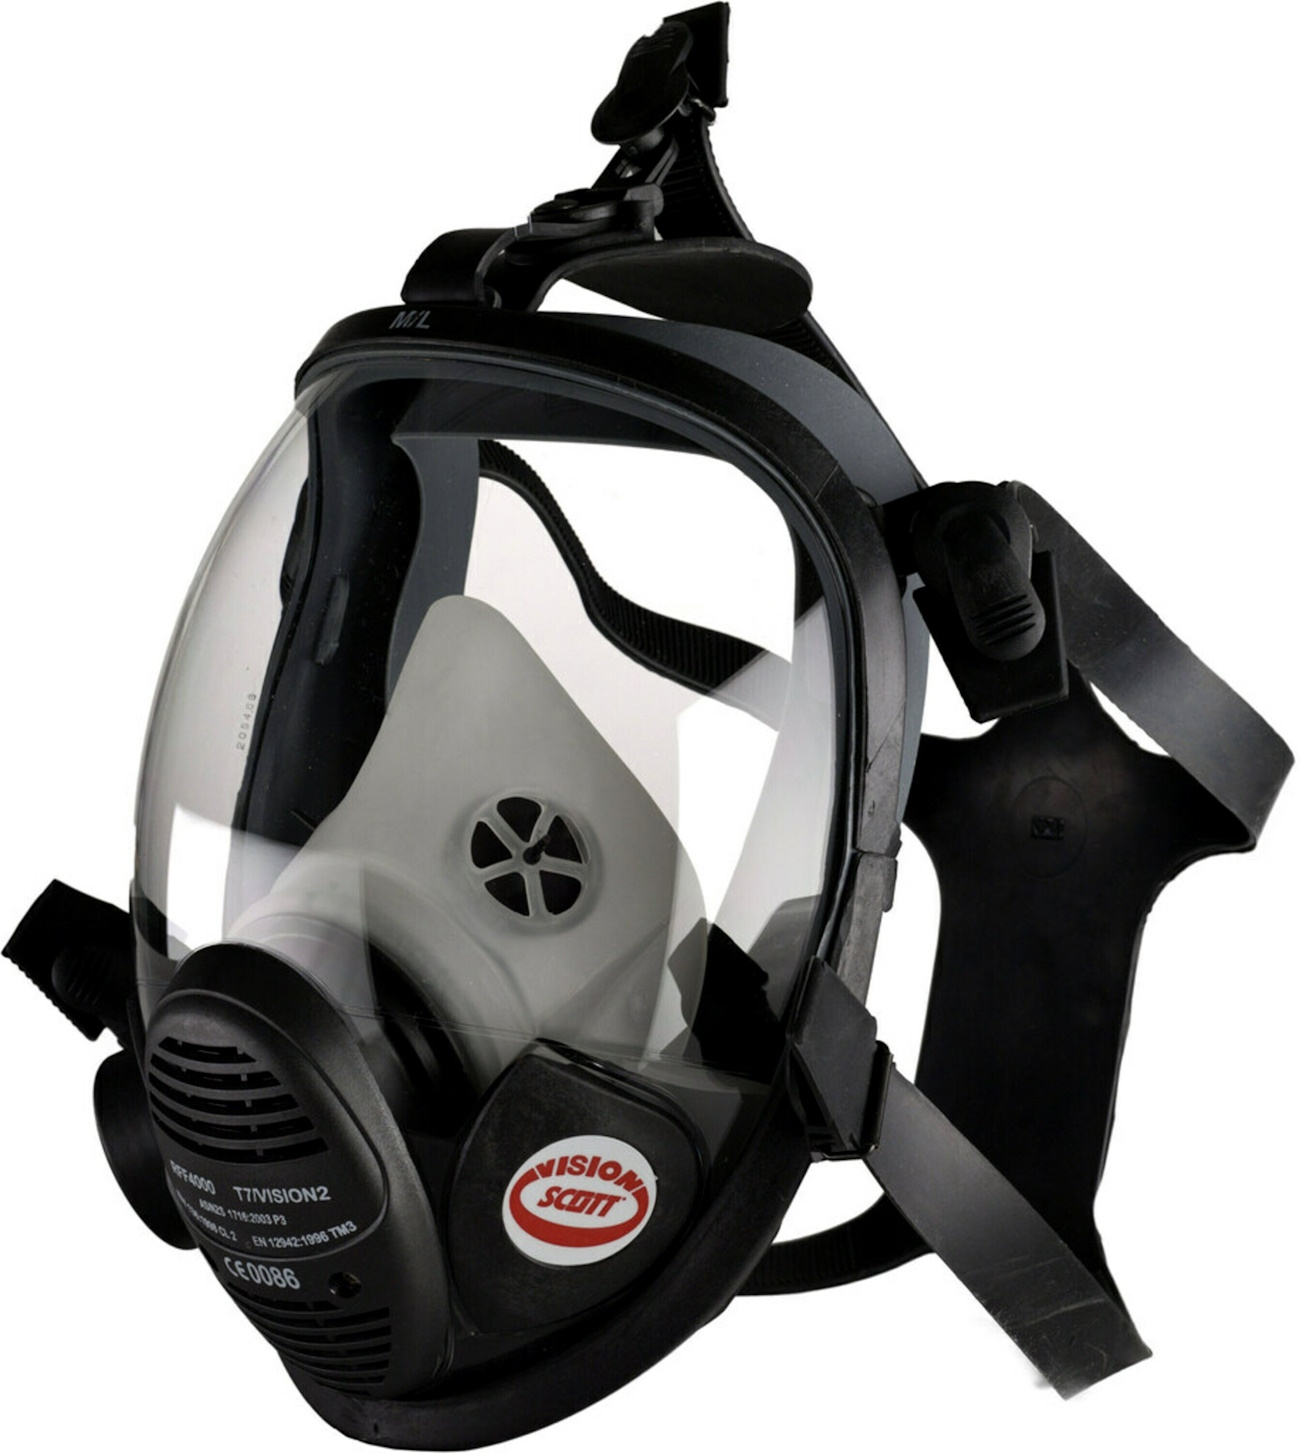 3M Full face mask with filter connection on the front FF-603F, large (size L)